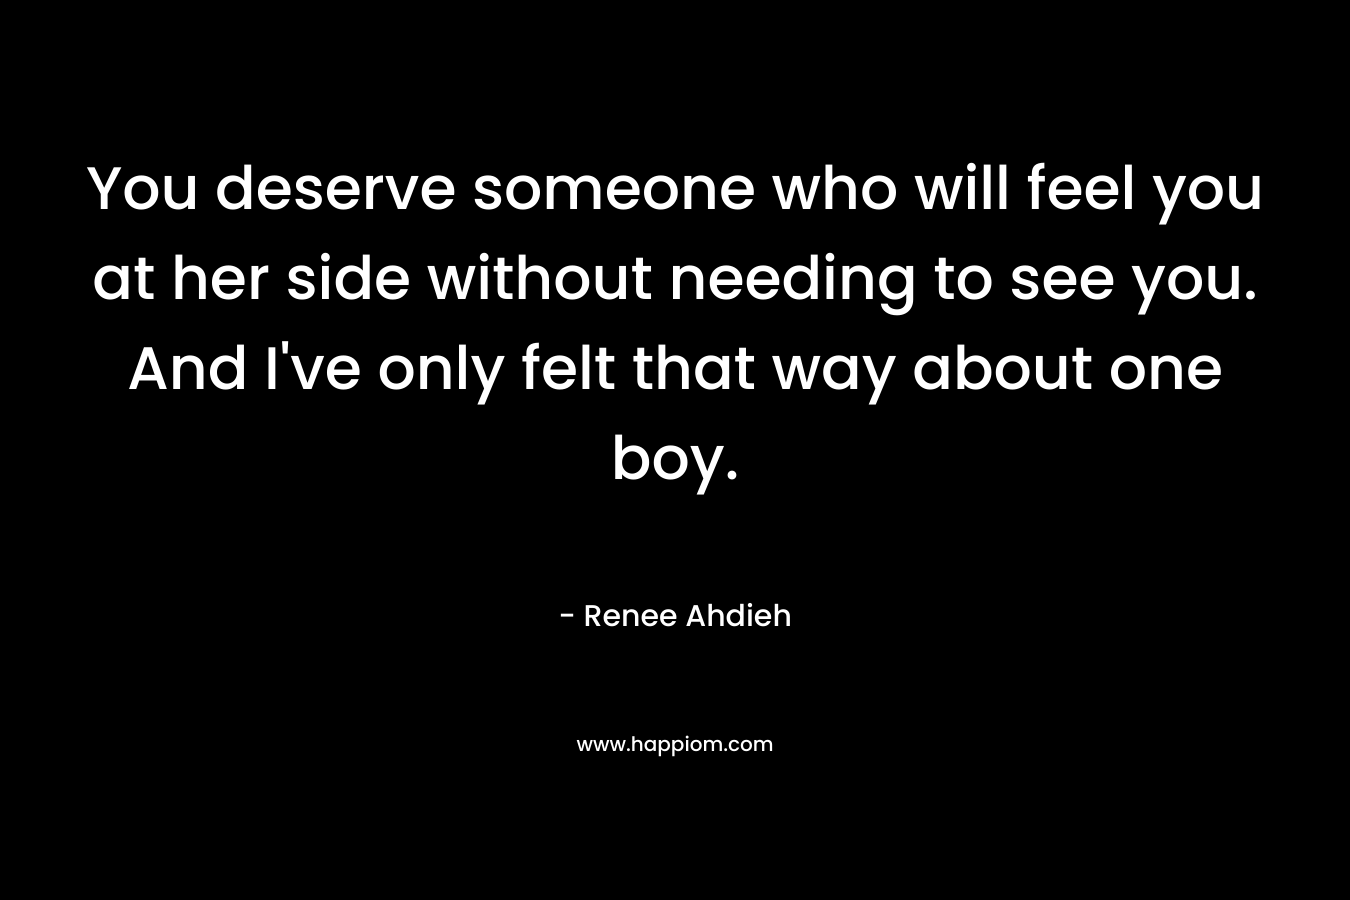 You deserve someone who will feel you at her side without needing to see you. And I’ve only felt that way about one boy. – Renee Ahdieh